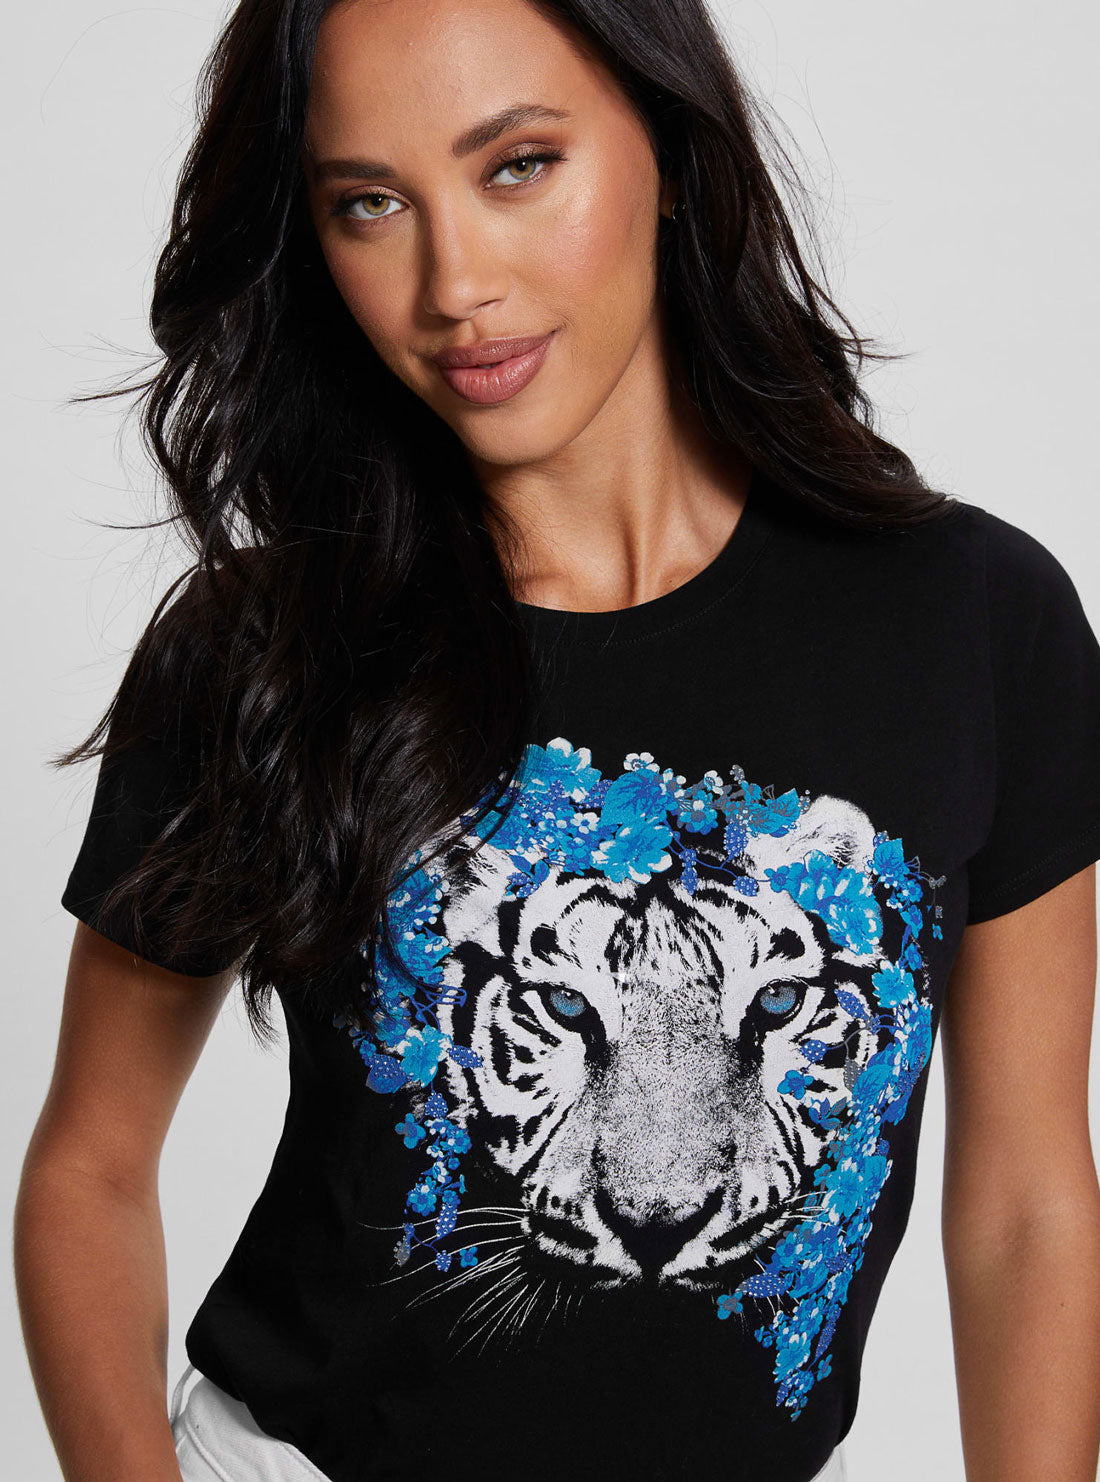 Black Floral Tiger Easy T-Shirt | GUESS Women's Apparel | detail view